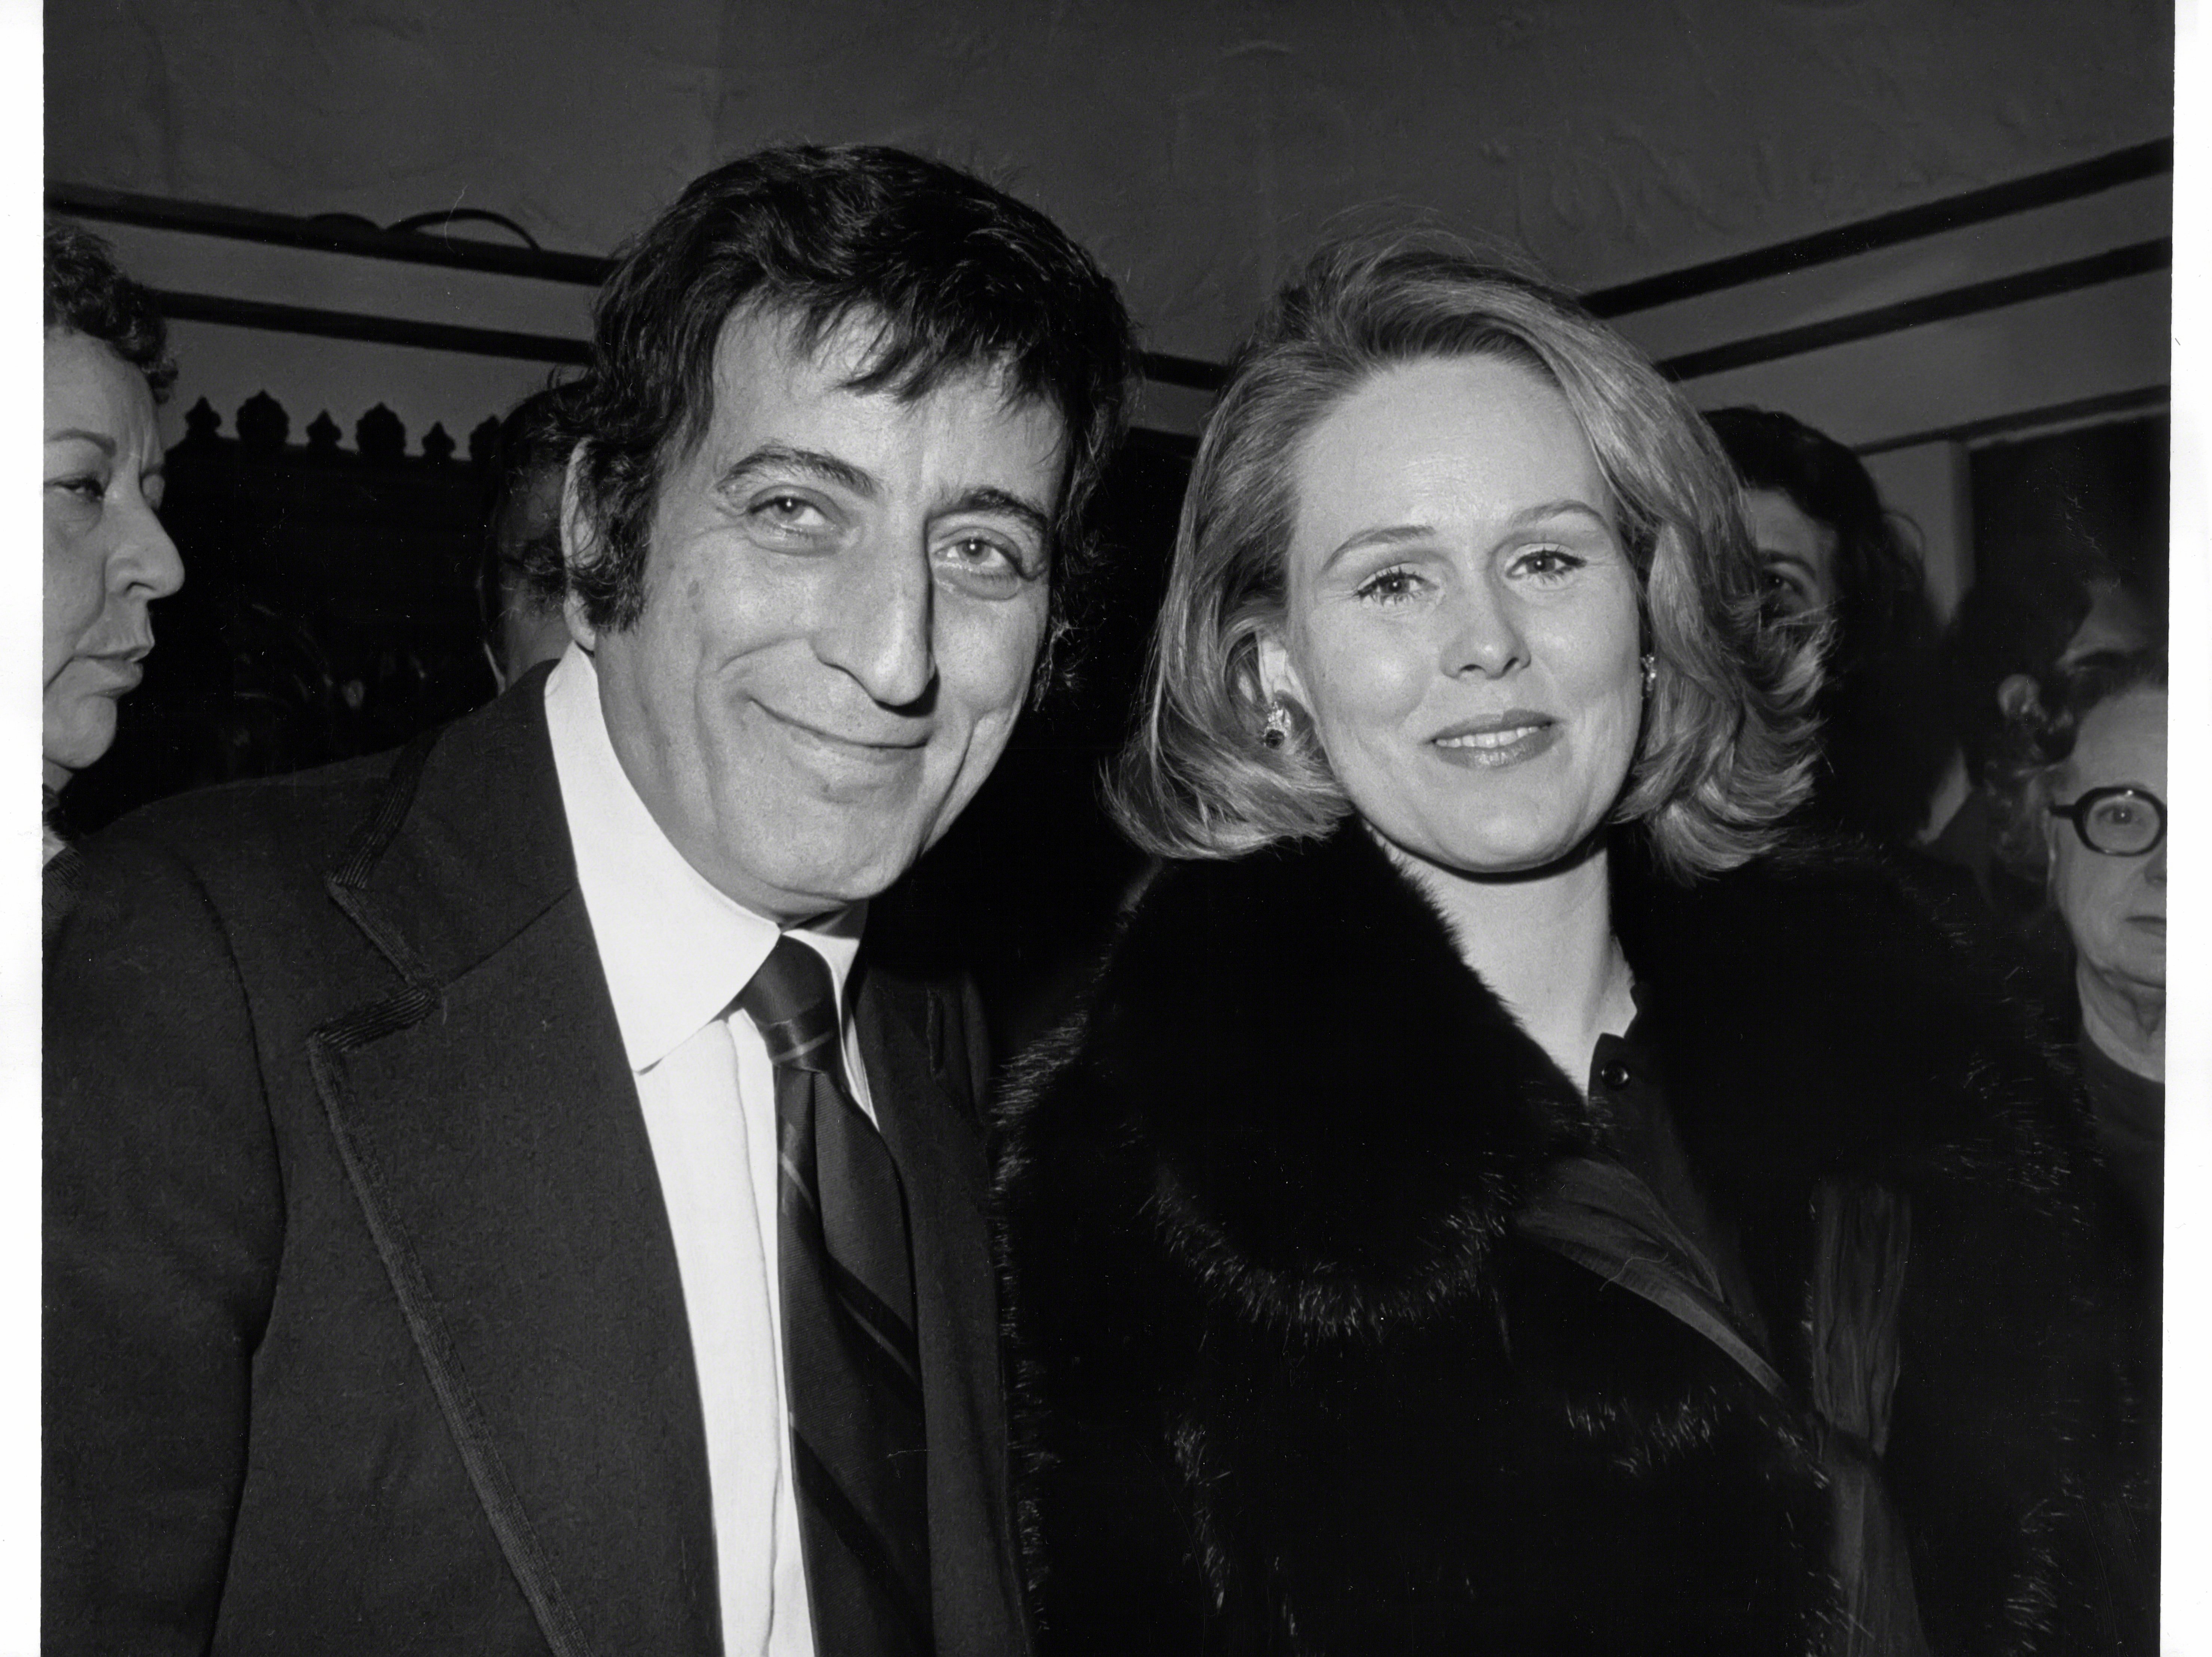 Tony Bennett and Sandra Grant Bennett were photographed together in the 1970s in New York City. | Source: Getty Images